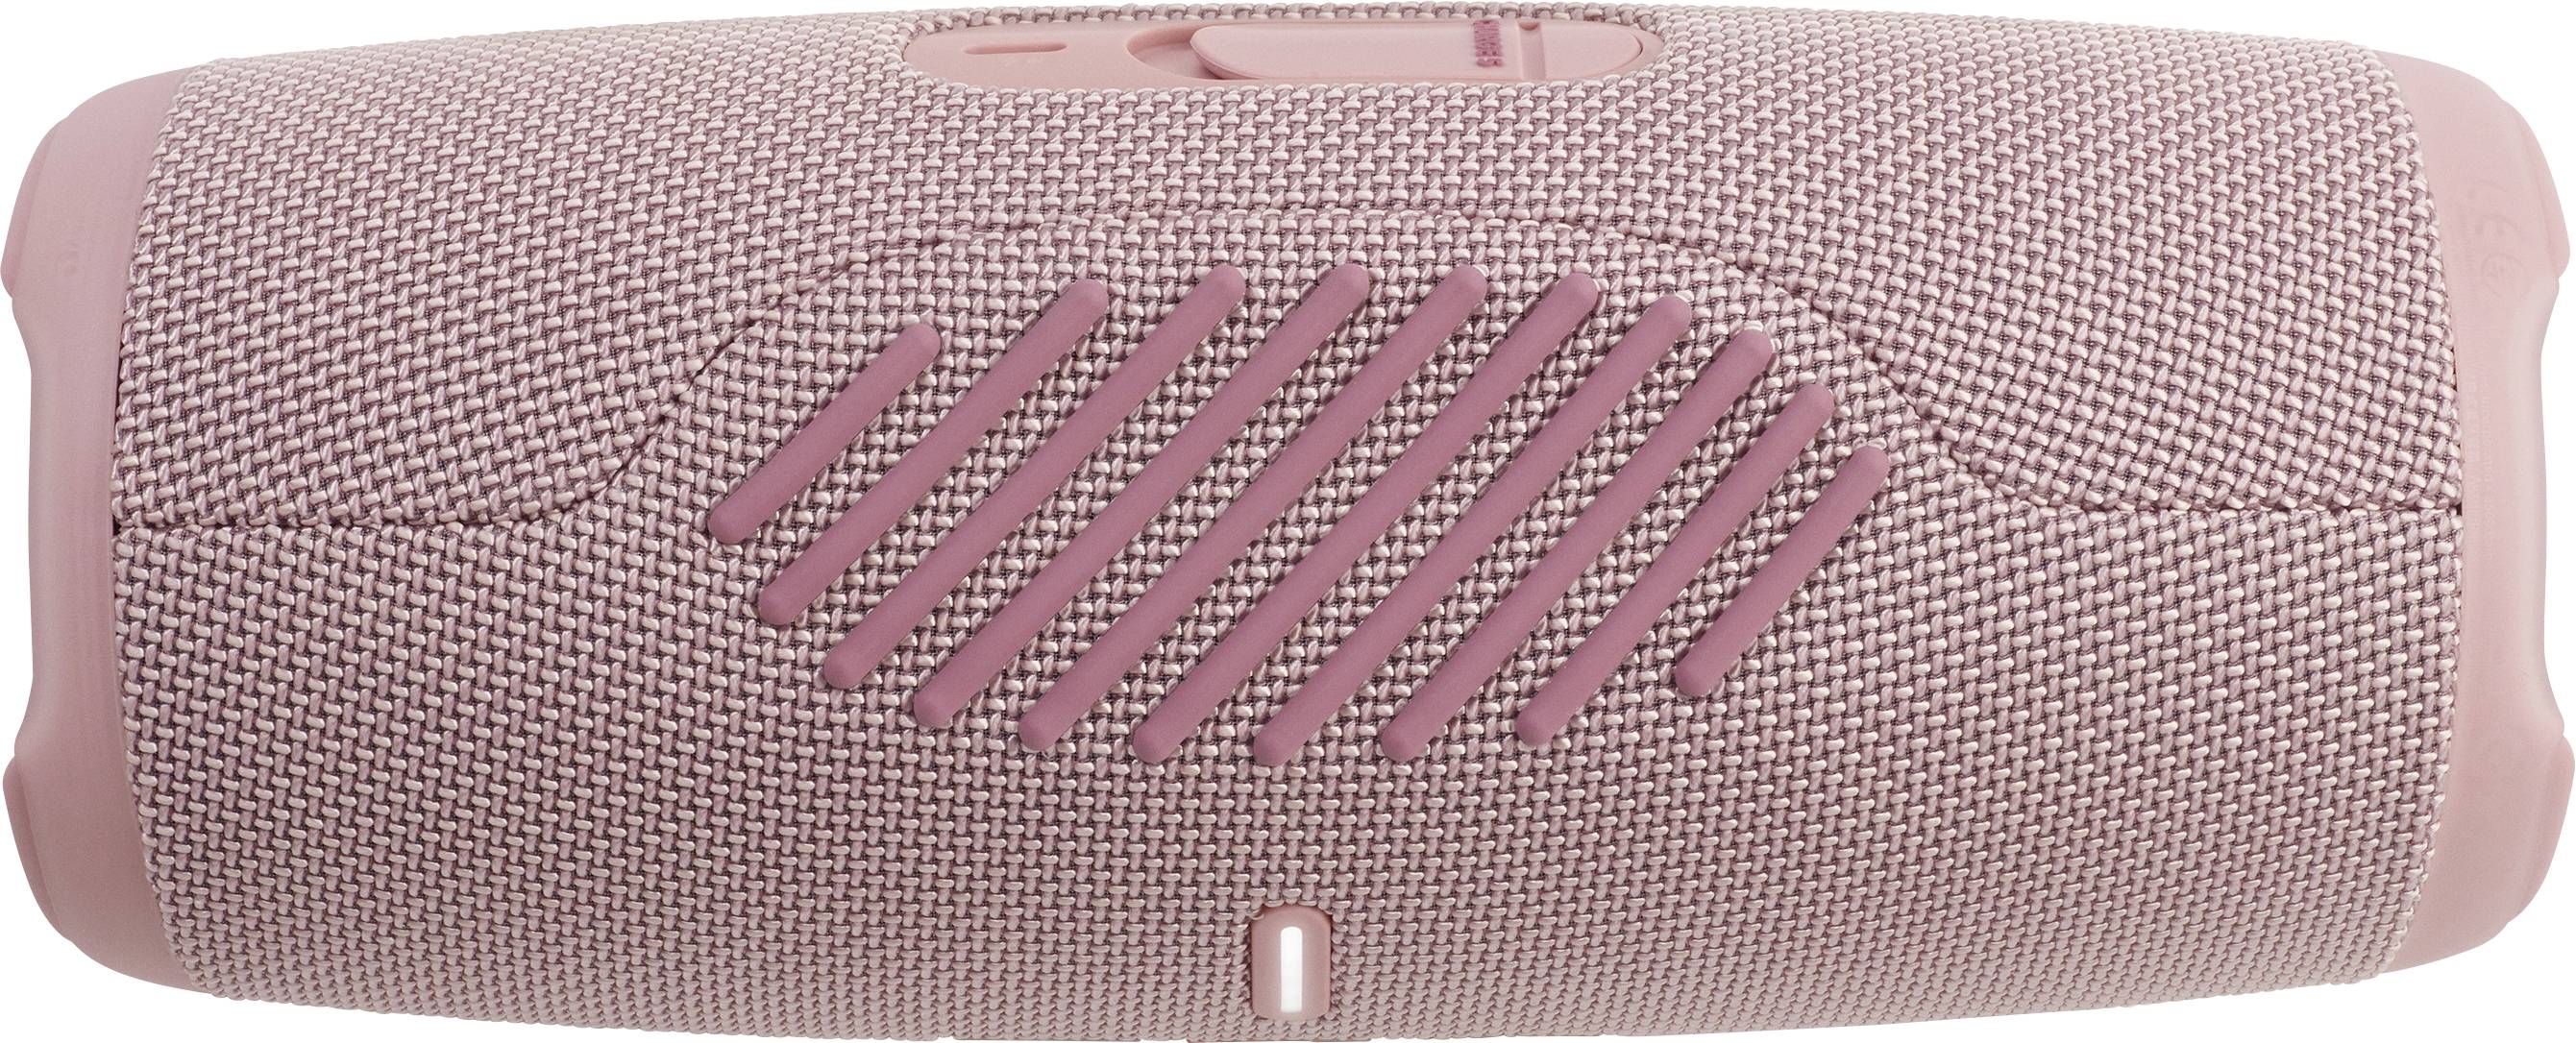 JBL CHARGE 5 Bluetooth speaker Outdoor, Water-proof, USB Pink